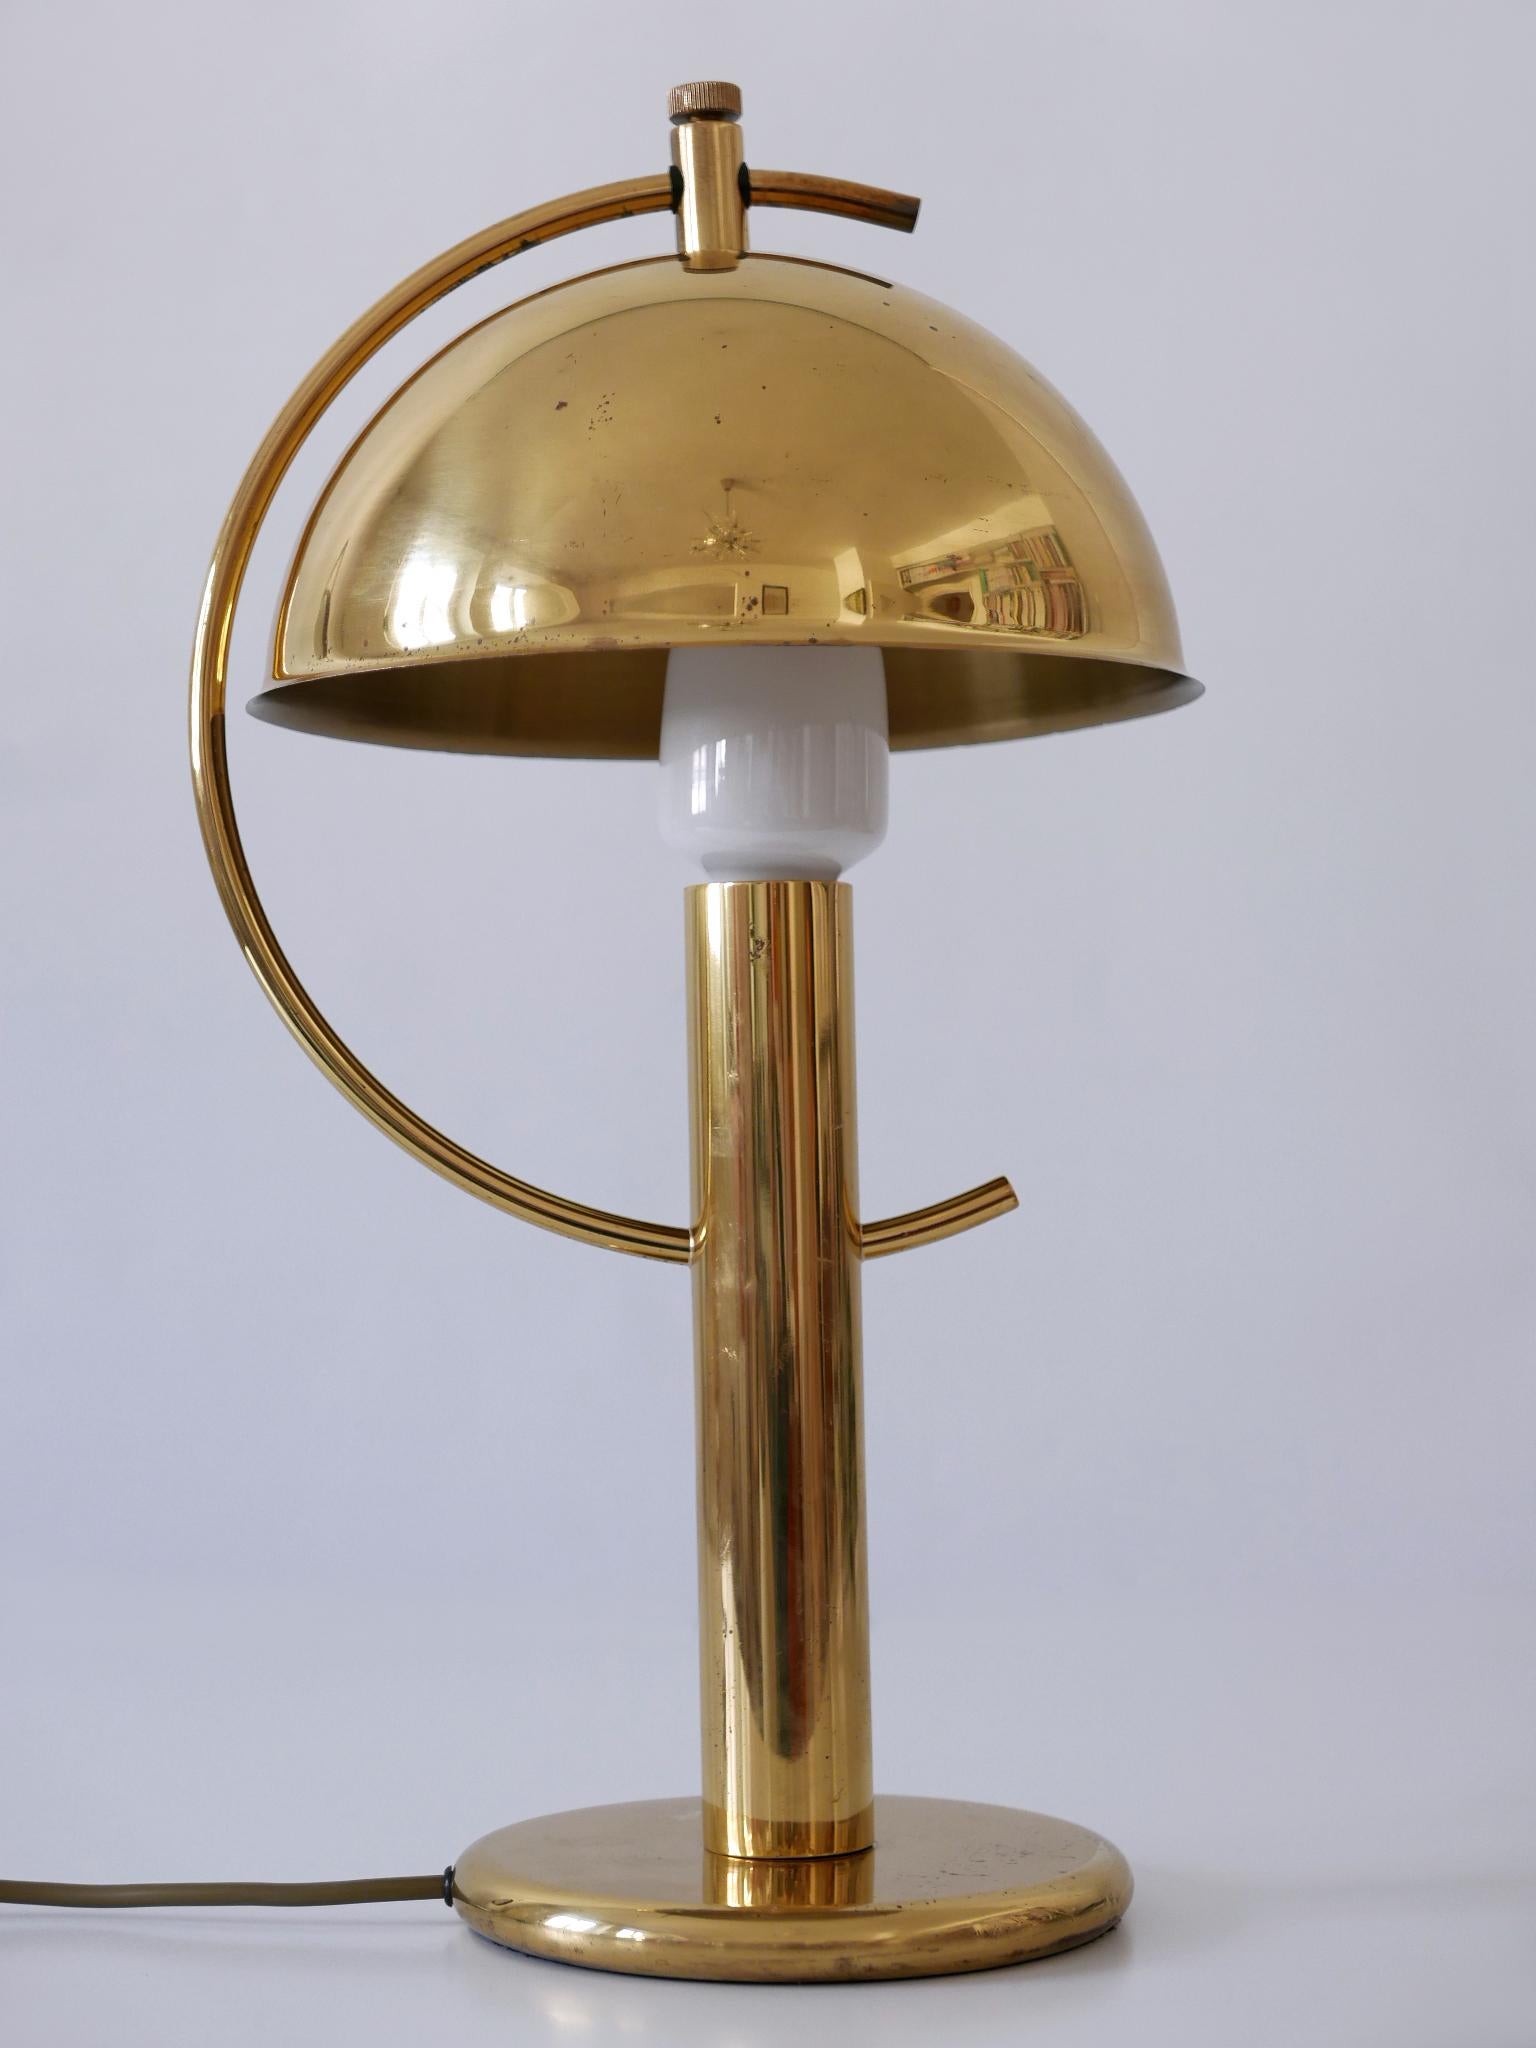 Exceptional Mid-Century Modern Brass Table Lamp by Gebrüder Cosack Germany 1960s For Sale 7